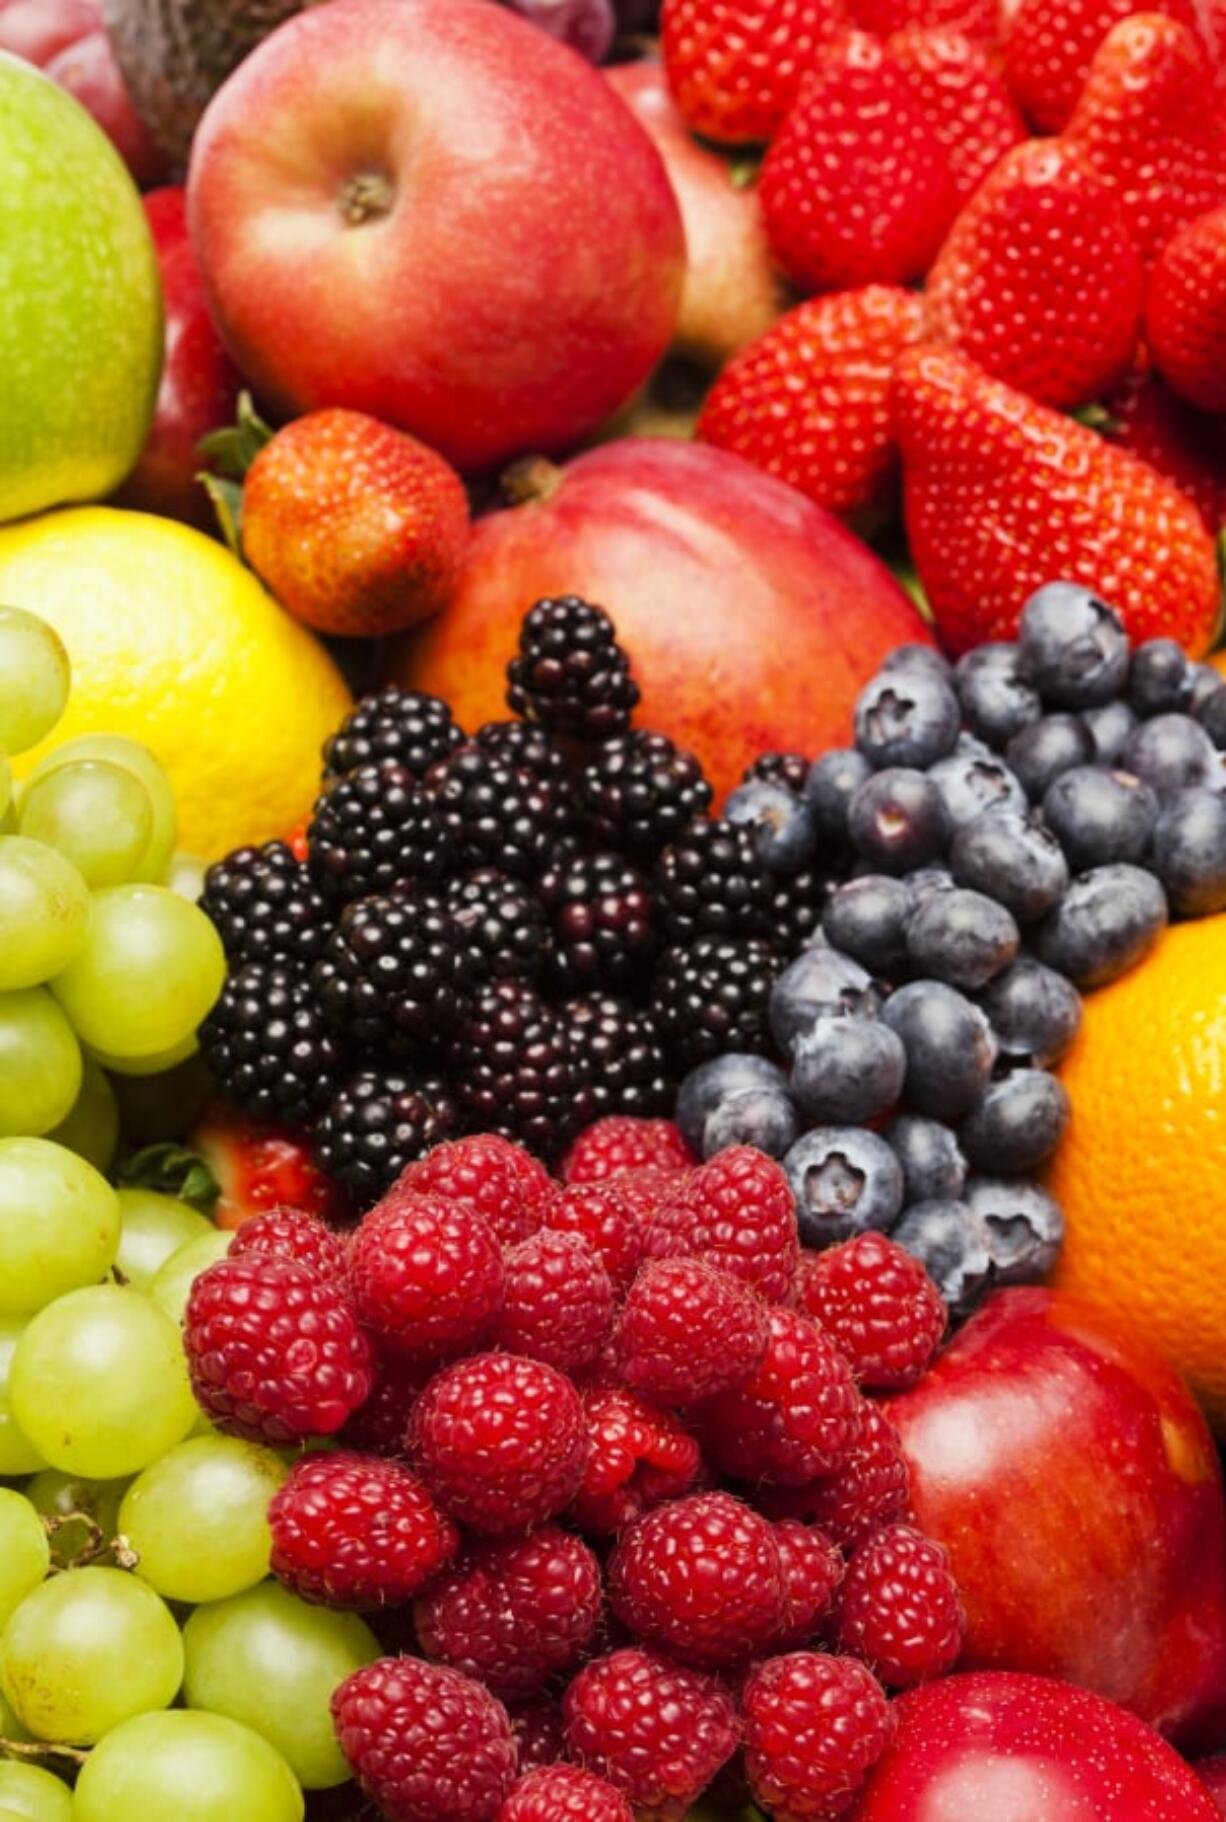 Fad diets are perpetuating a myth that fruit is toxic because of its sugar.